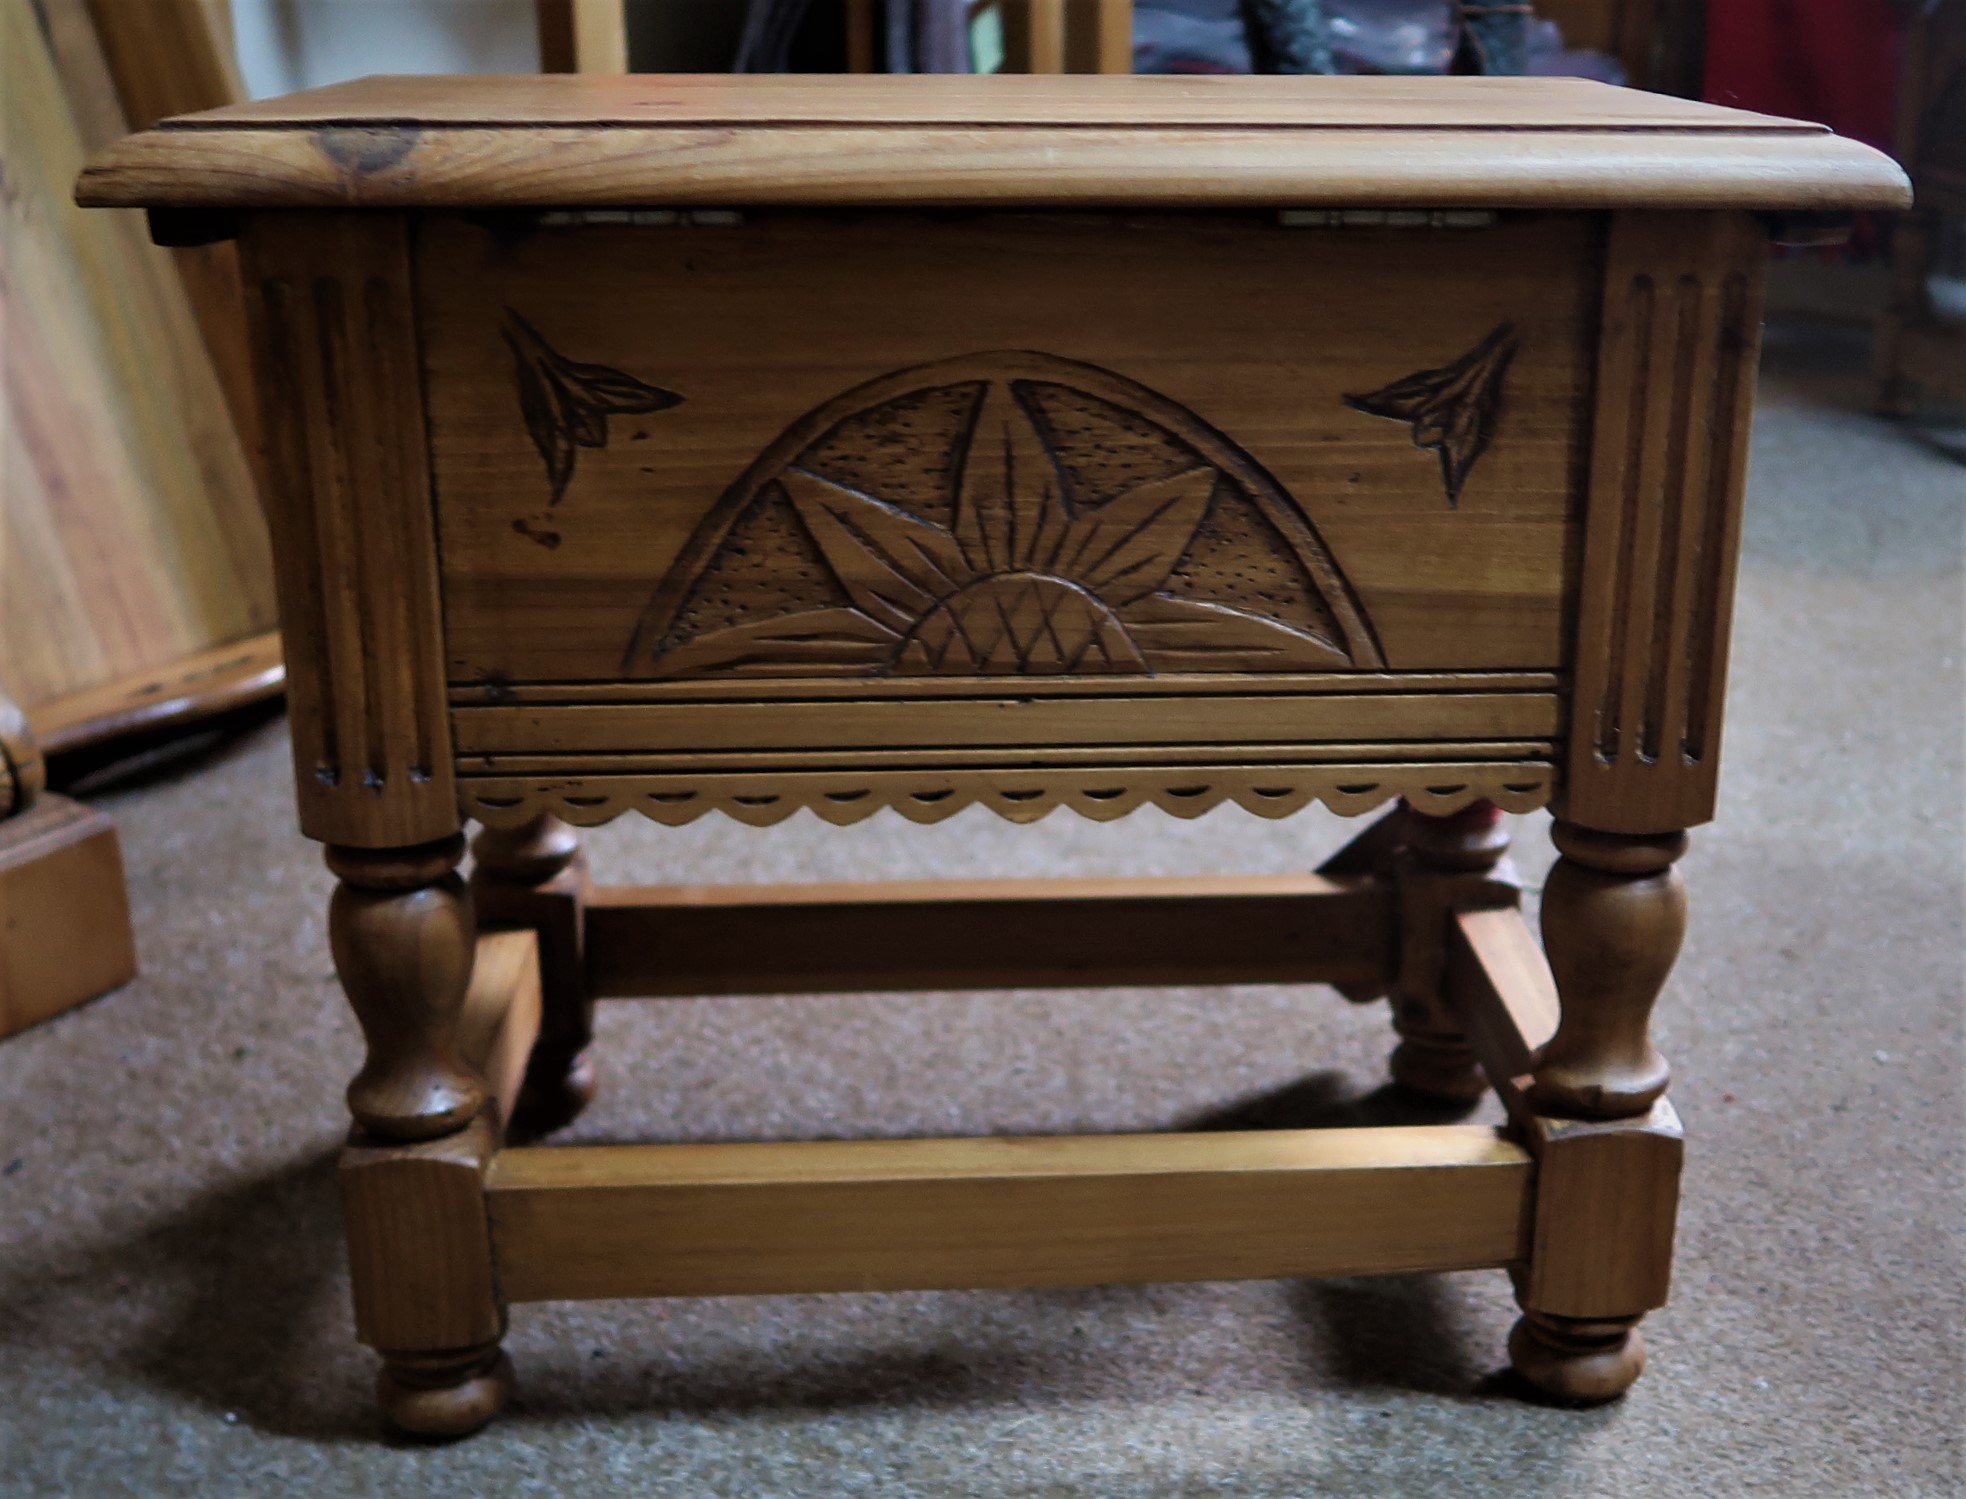 Reclaimed handmade storage stool/table. For occasional table or sewing/remotes storage.